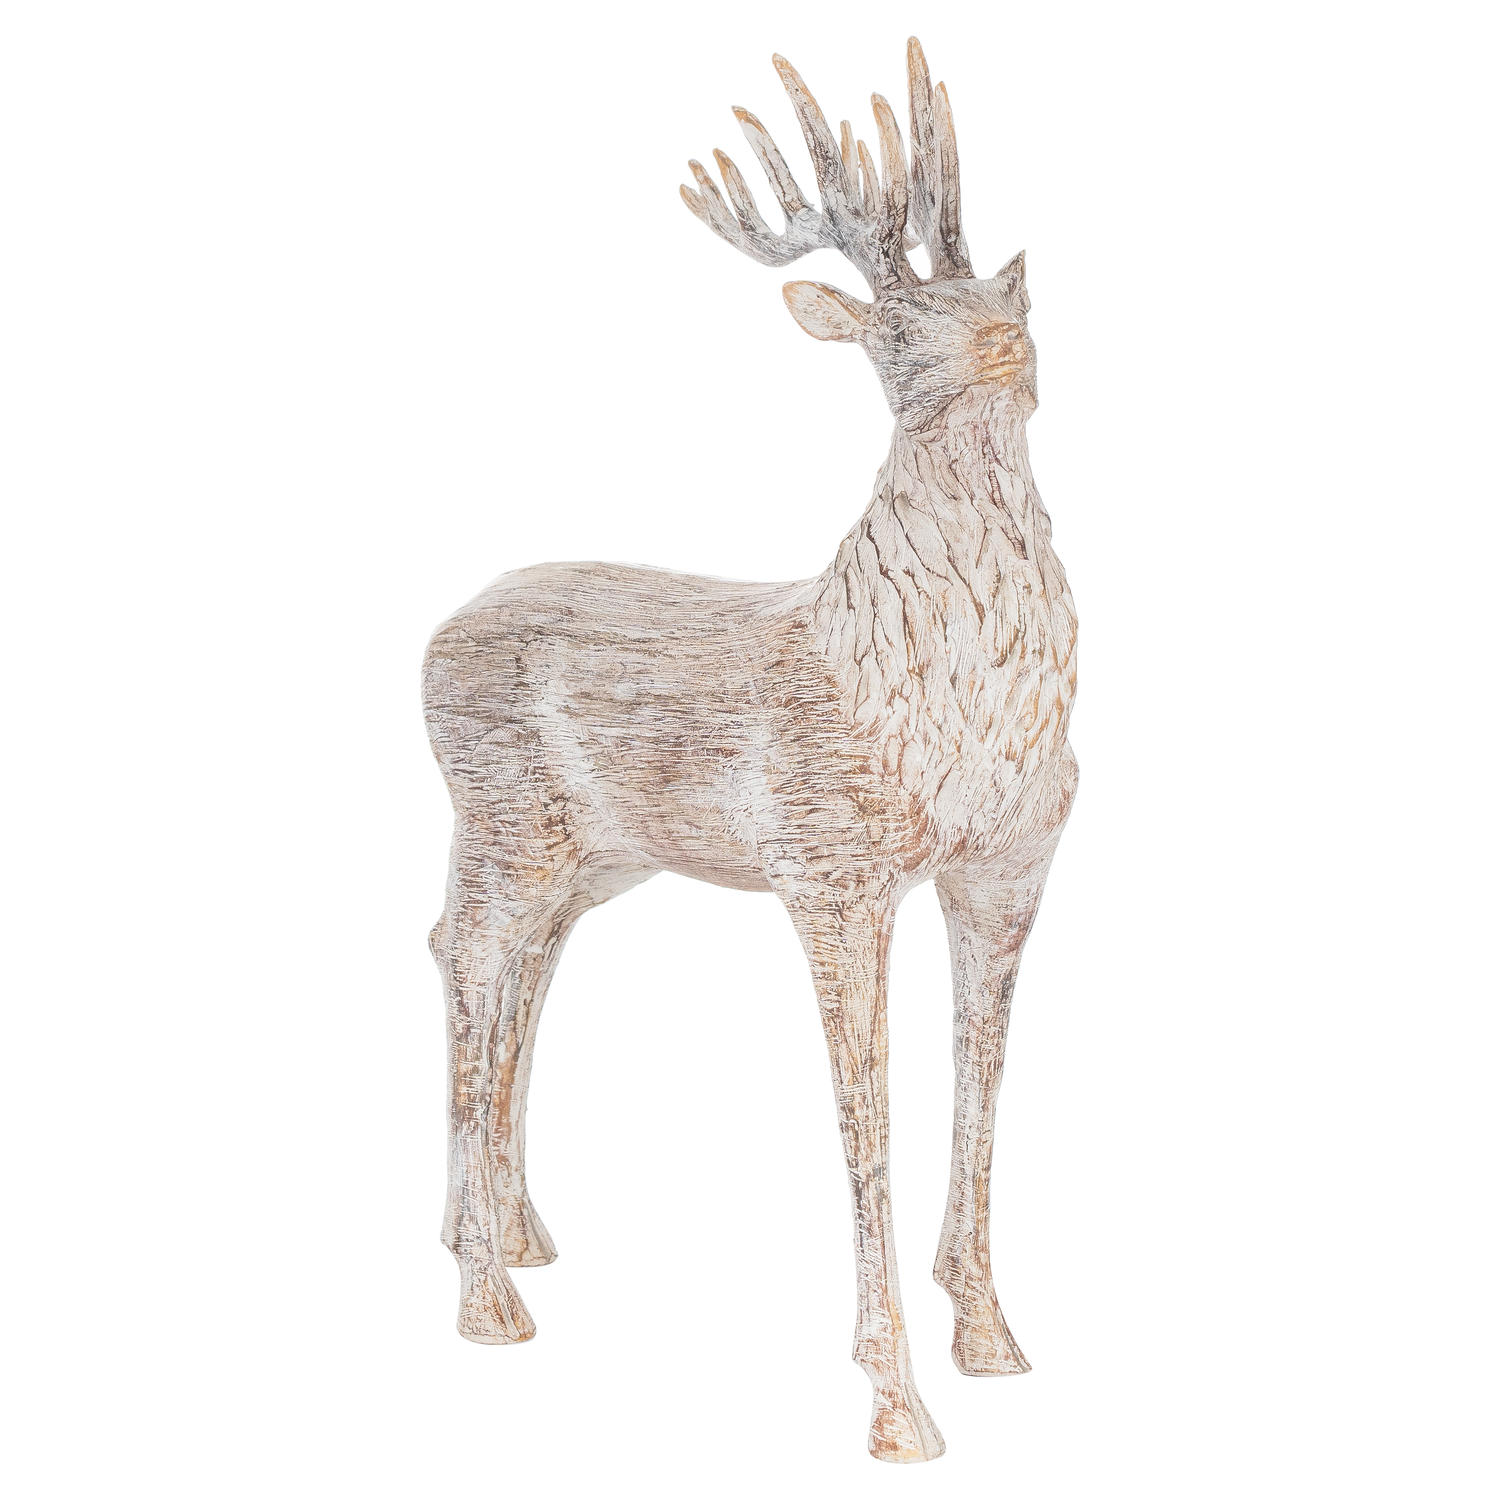 Carved Wood Effect Stag - Image 1